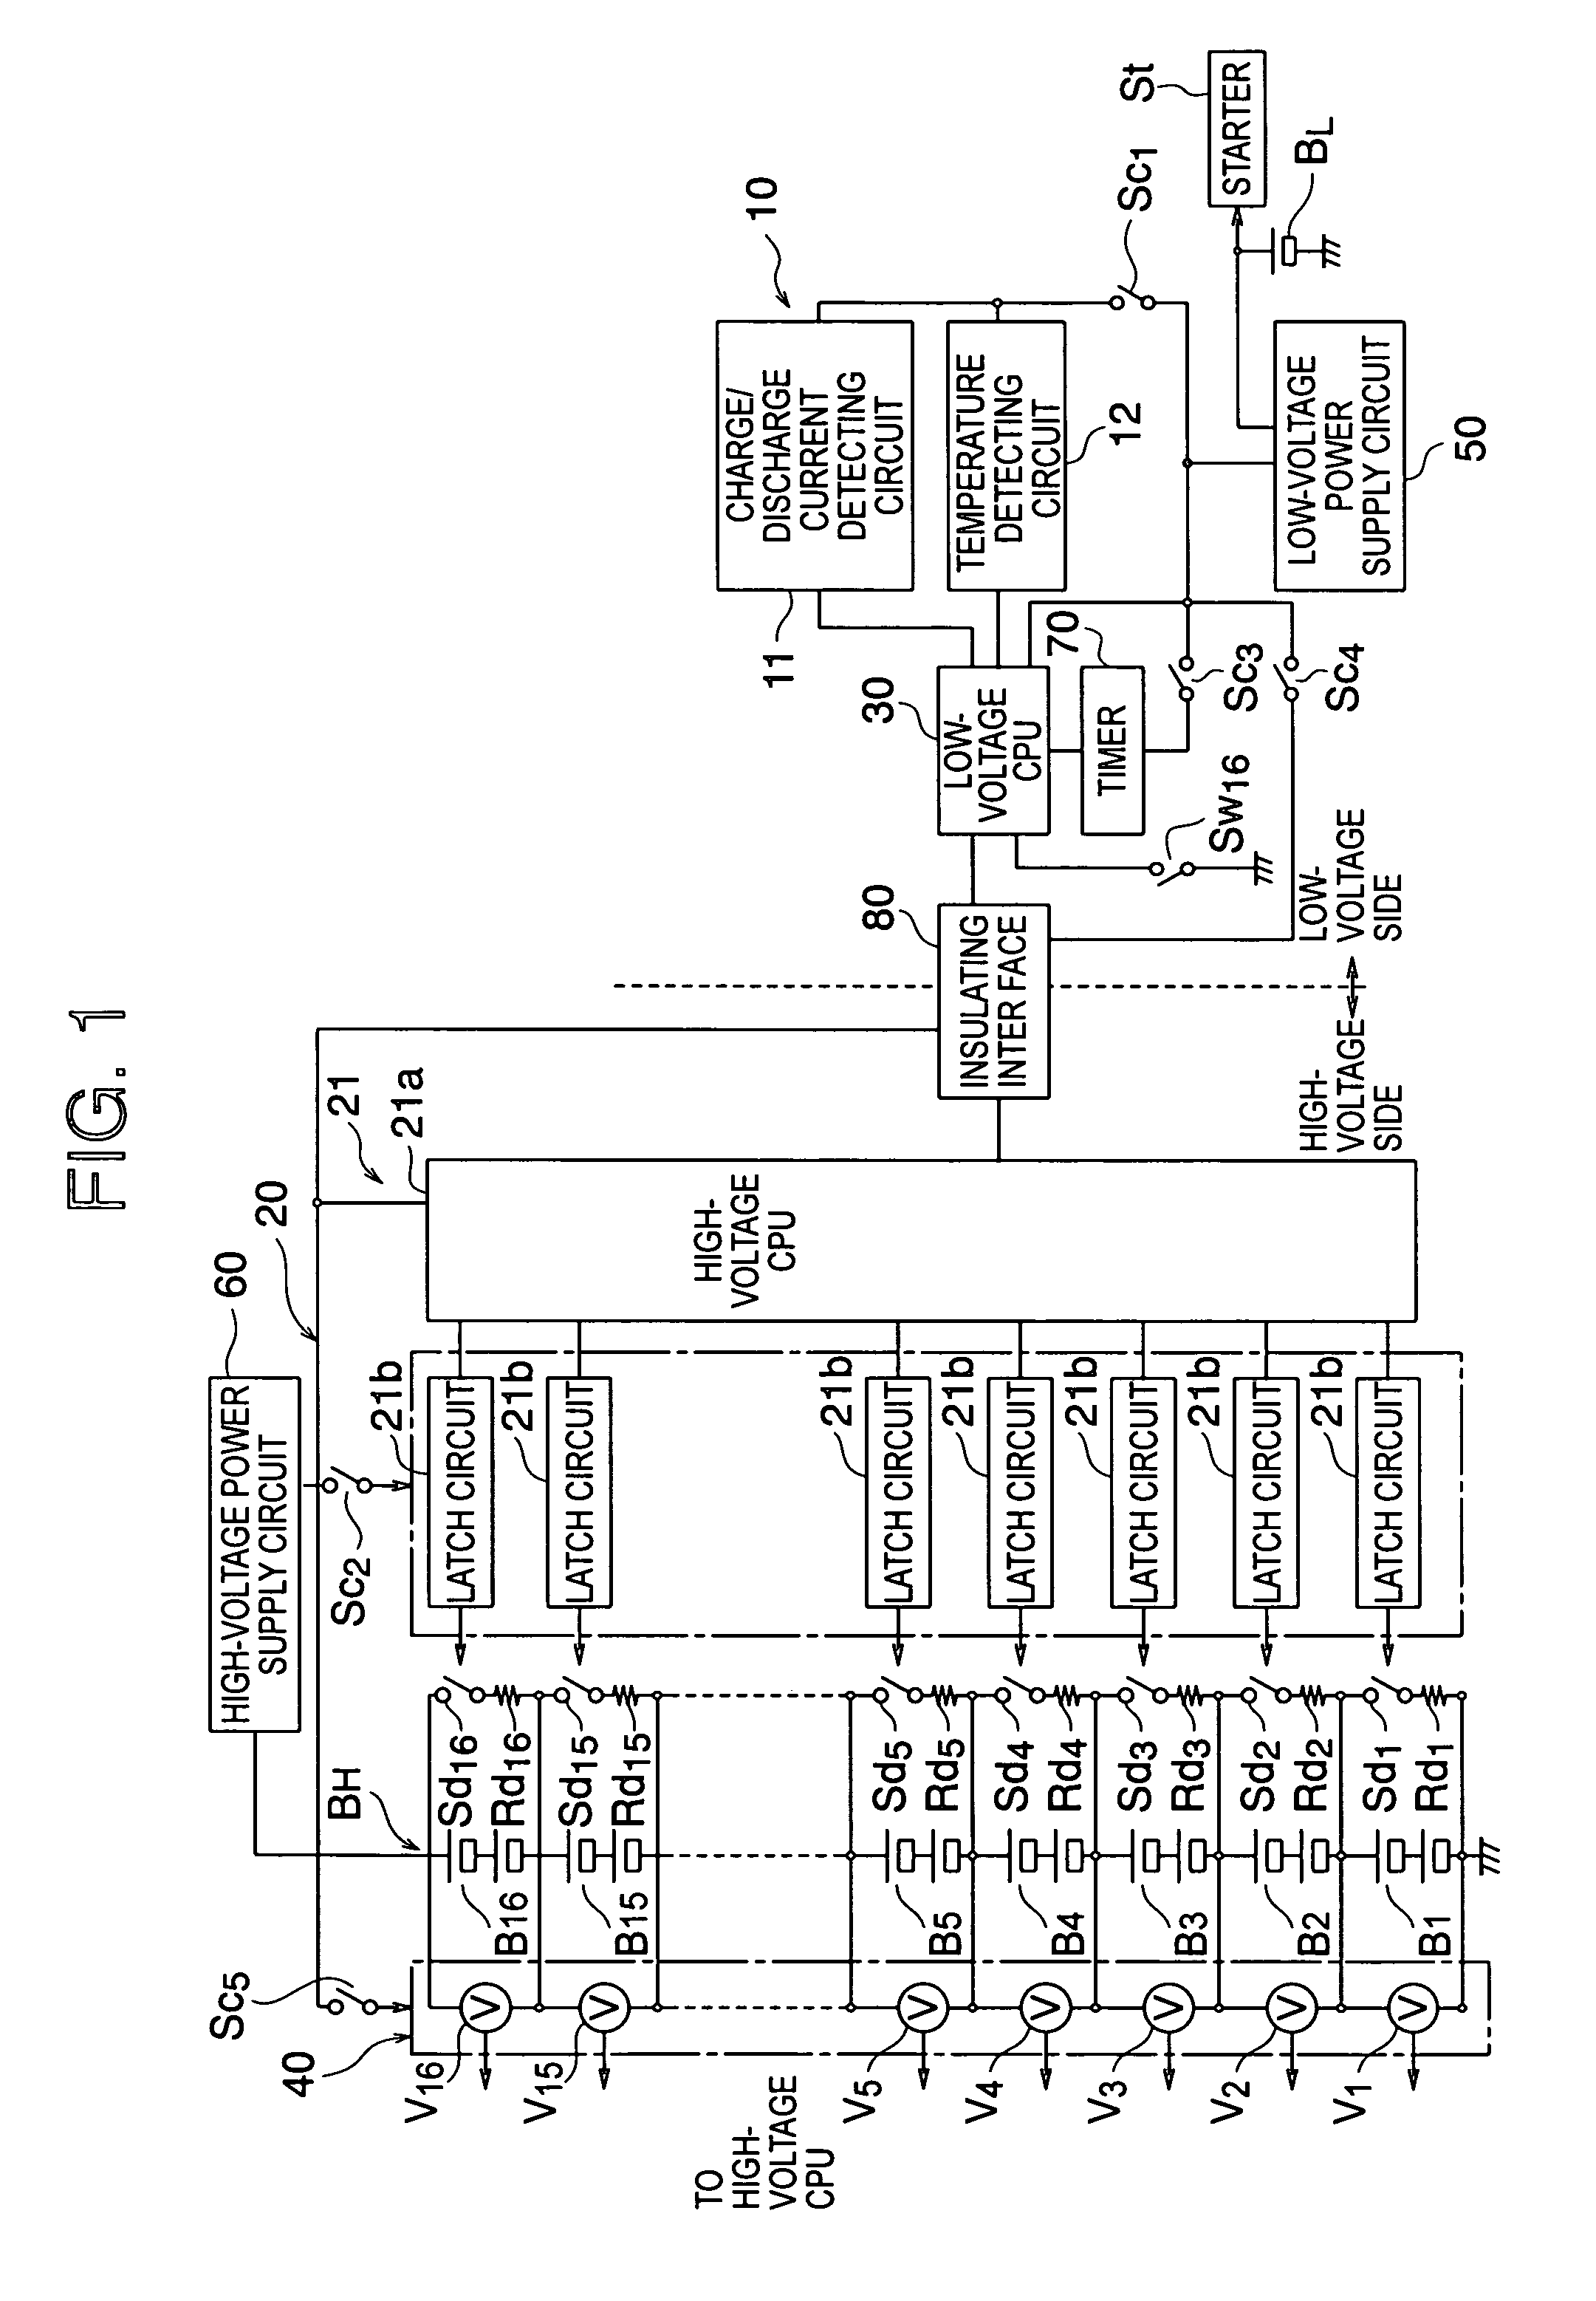 Battery control device